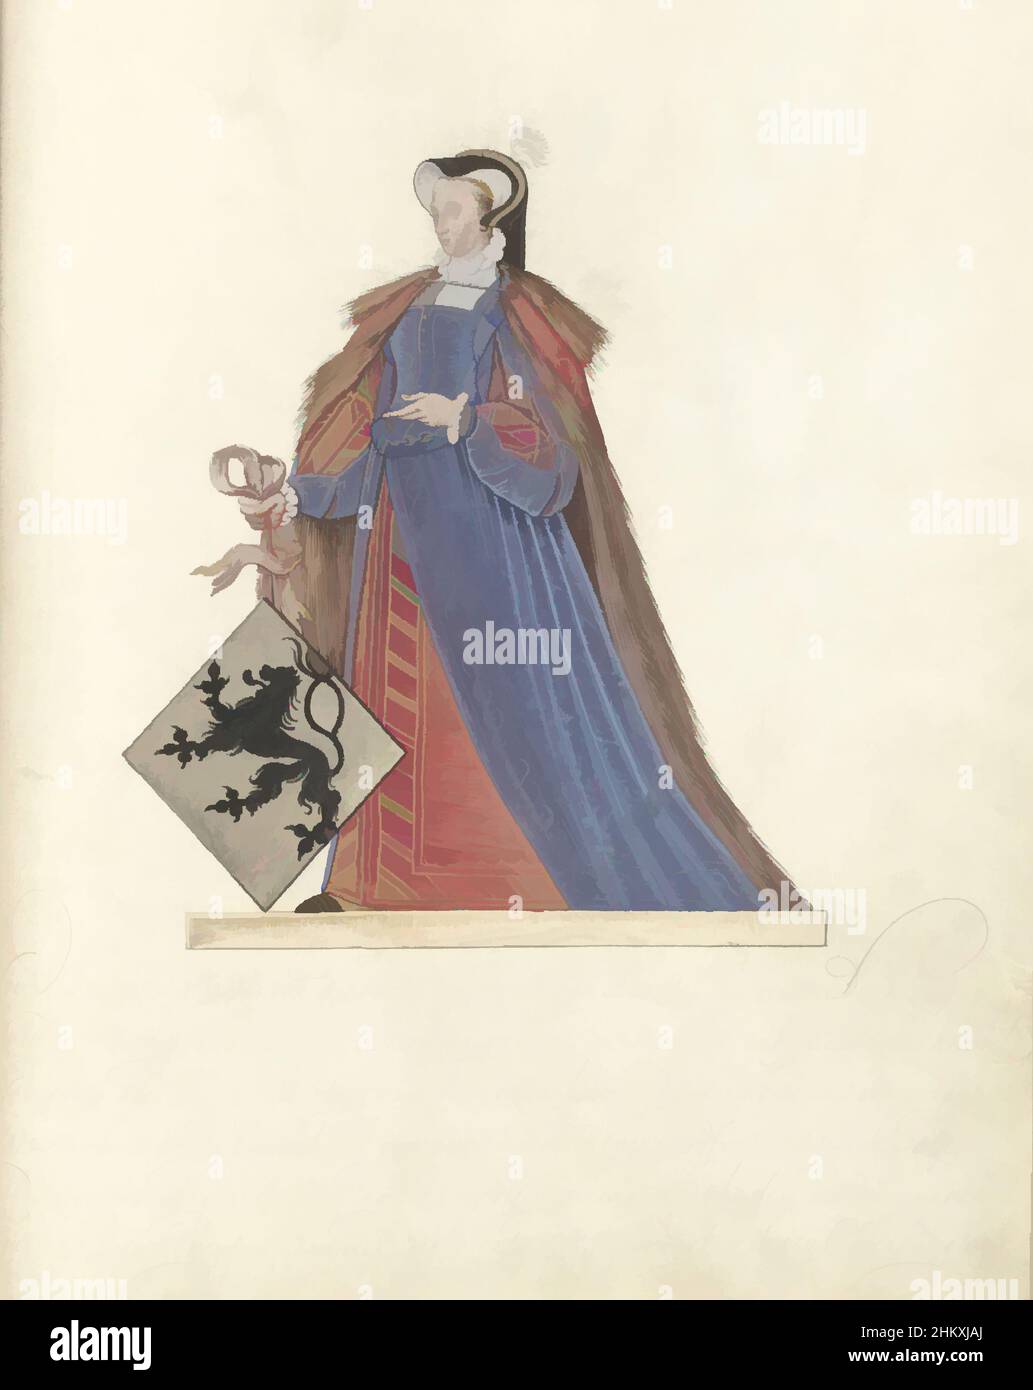 Art inspired by Jutta van der Leck, lady of Culemborg, Jutta van der Leck, lady of Culemborg. Wife of Hubrecht IV, lord of Culemborg. Standing full-length with the coat of arms of the Van der Leck family. Part of an illustrated manuscript containing the genealogy of the lords and counts, Classic works modernized by Artotop with a splash of modernity. Shapes, color and value, eye-catching visual impact on art. Emotions through freedom of artworks in a contemporary way. A timeless message pursuing a wildly creative new direction. Artists turning to the digital medium and creating the Artotop NFT Stock Photo